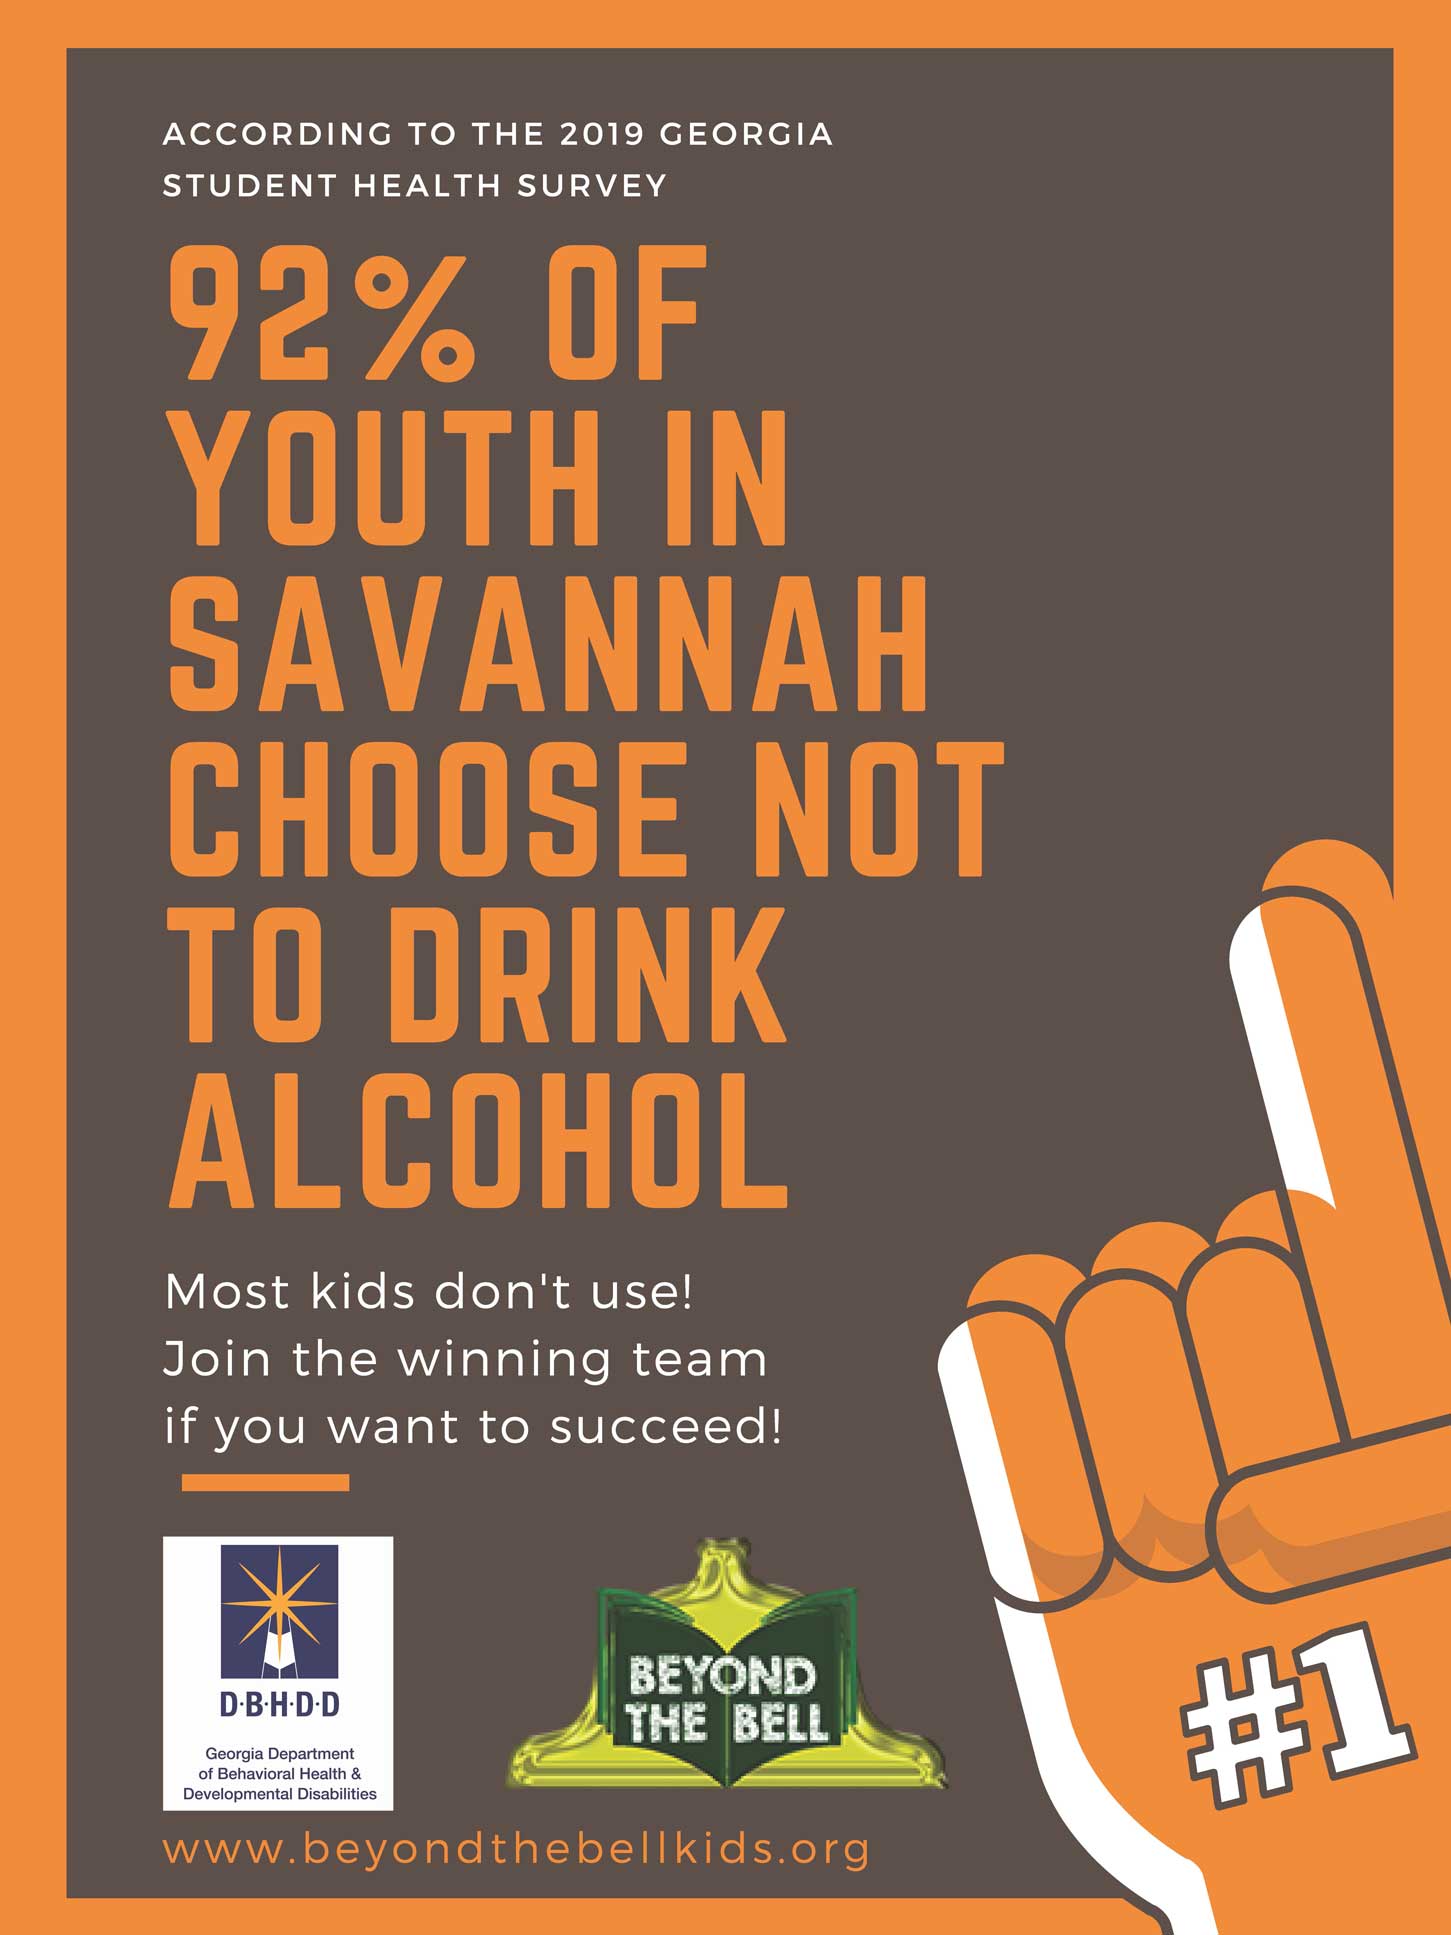 Orange and white text on a brown background: "92% of youth in Savannah choose not to drink alcohol. Most kids don't use! Join the winning team if you want to succeed!"